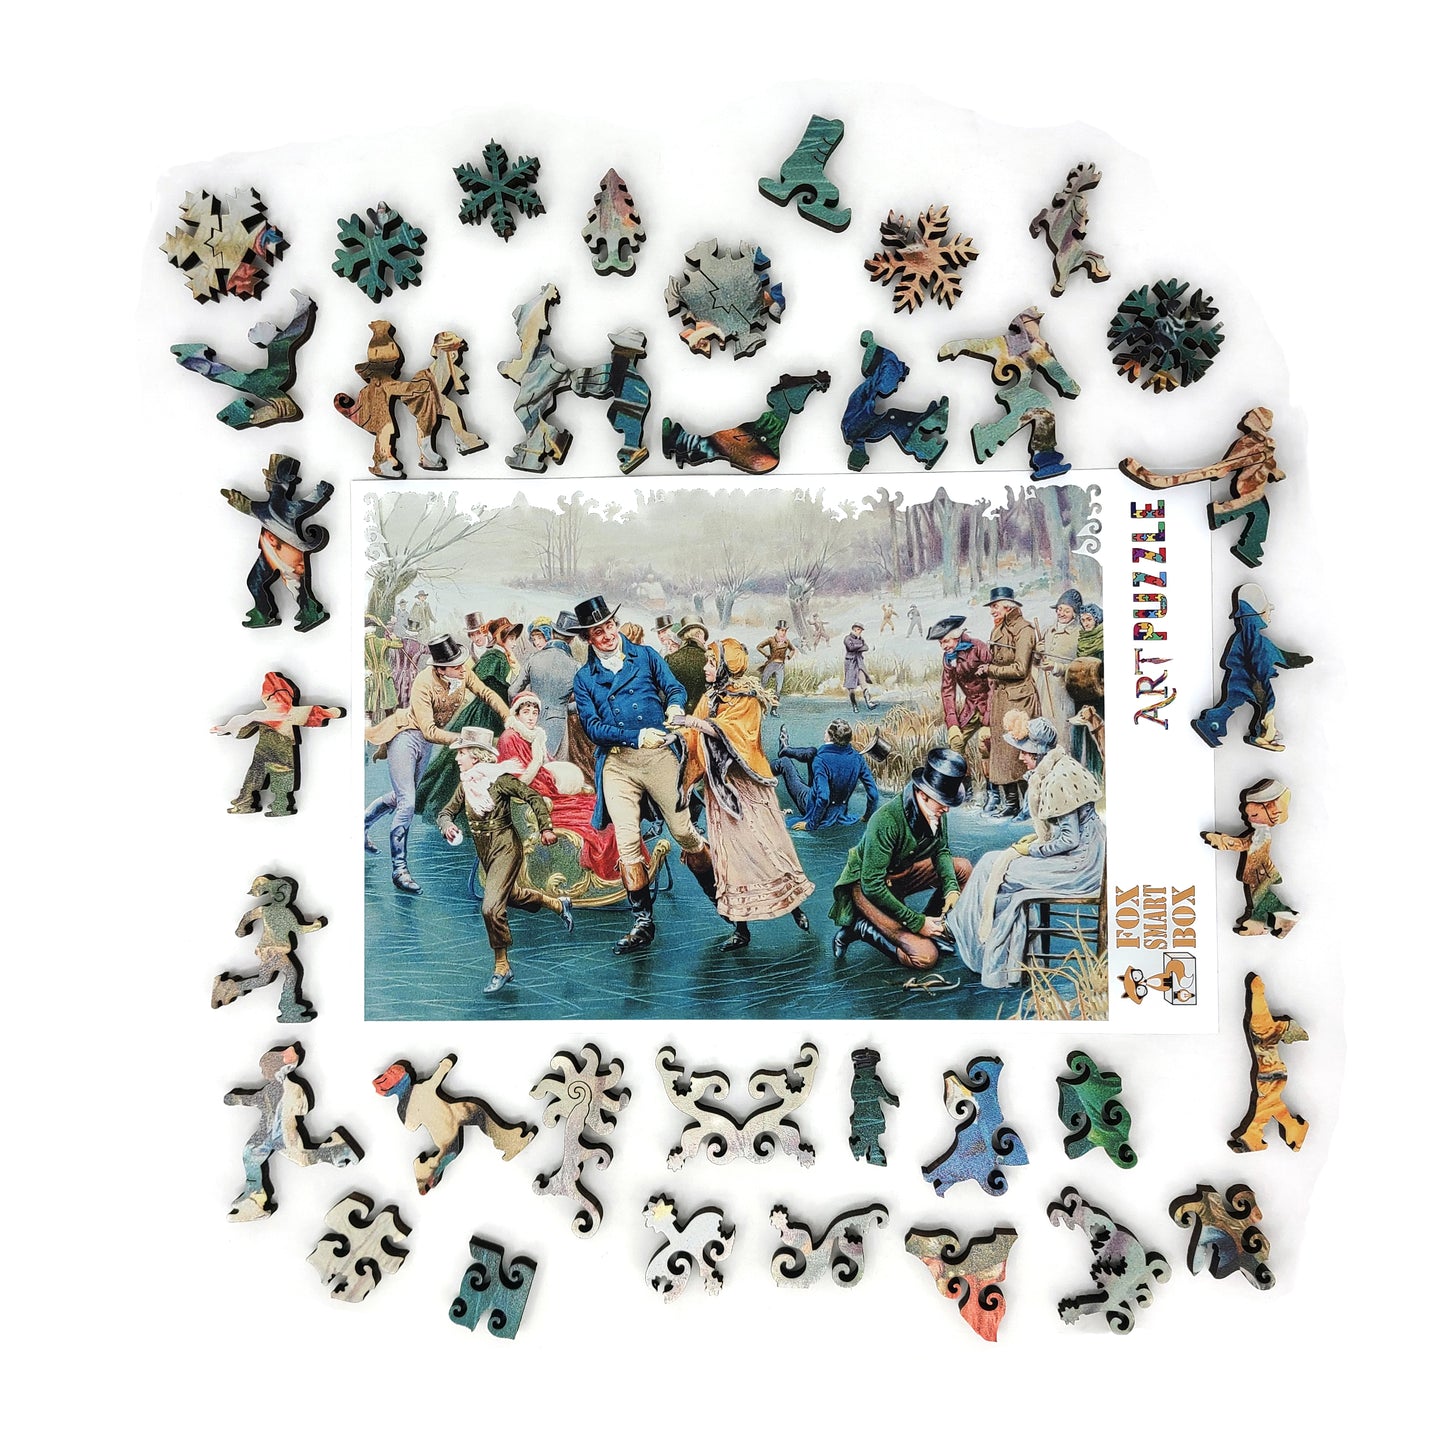 Large Format Wooden Jigsaw Puzzle with Uniquely Shaped Pieces for Seniors and Adults - 255 Pieces - A Merry Christmas